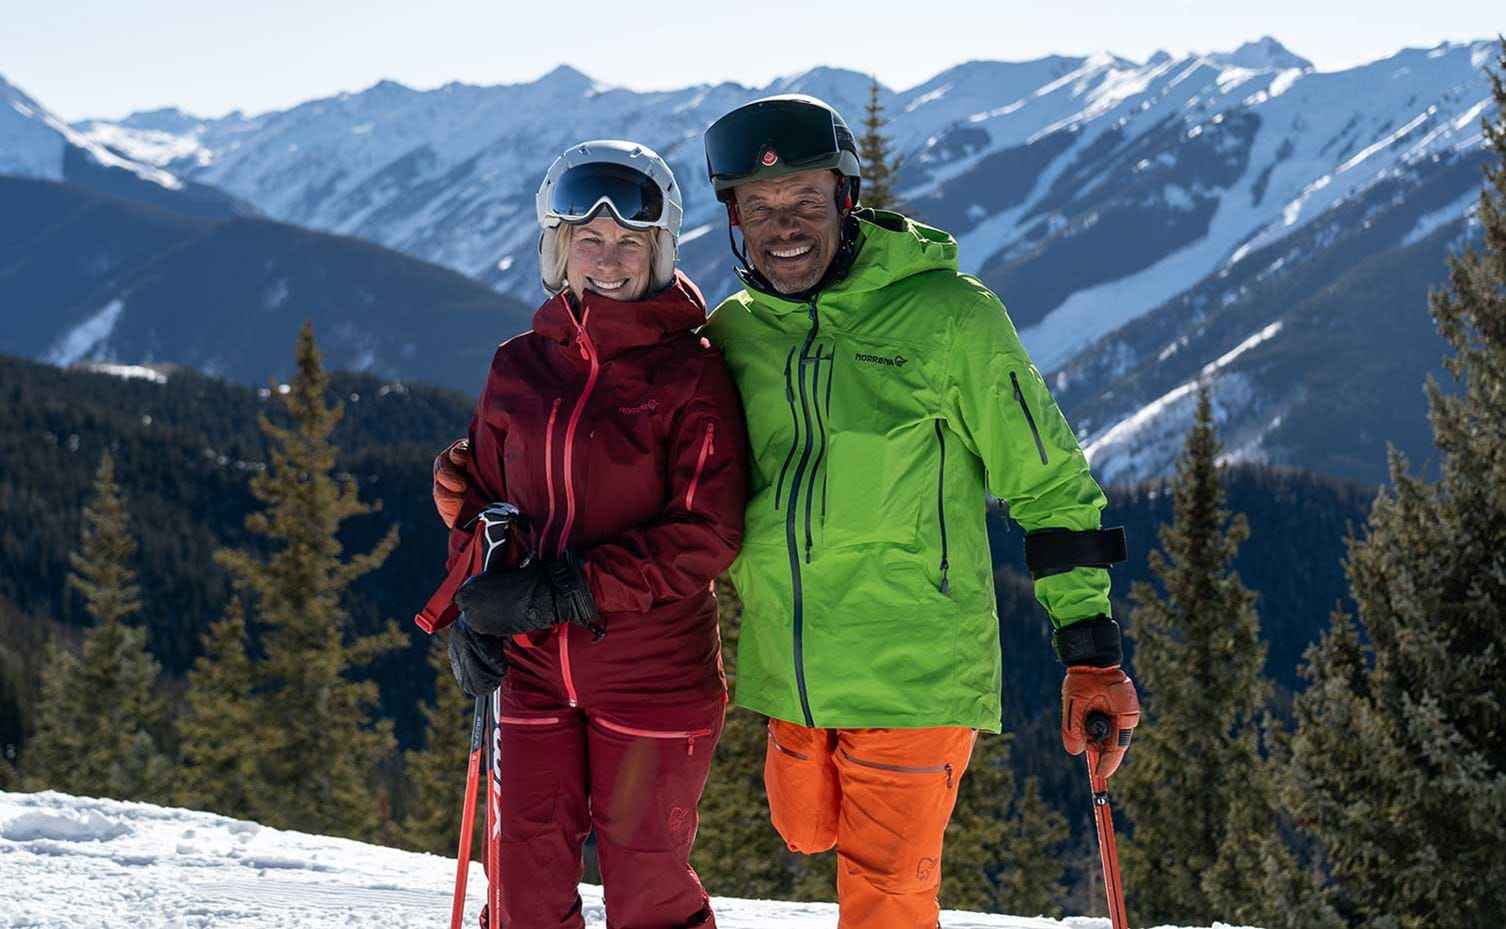 Tony Drees and his wife Maria at Aspen Snowmass